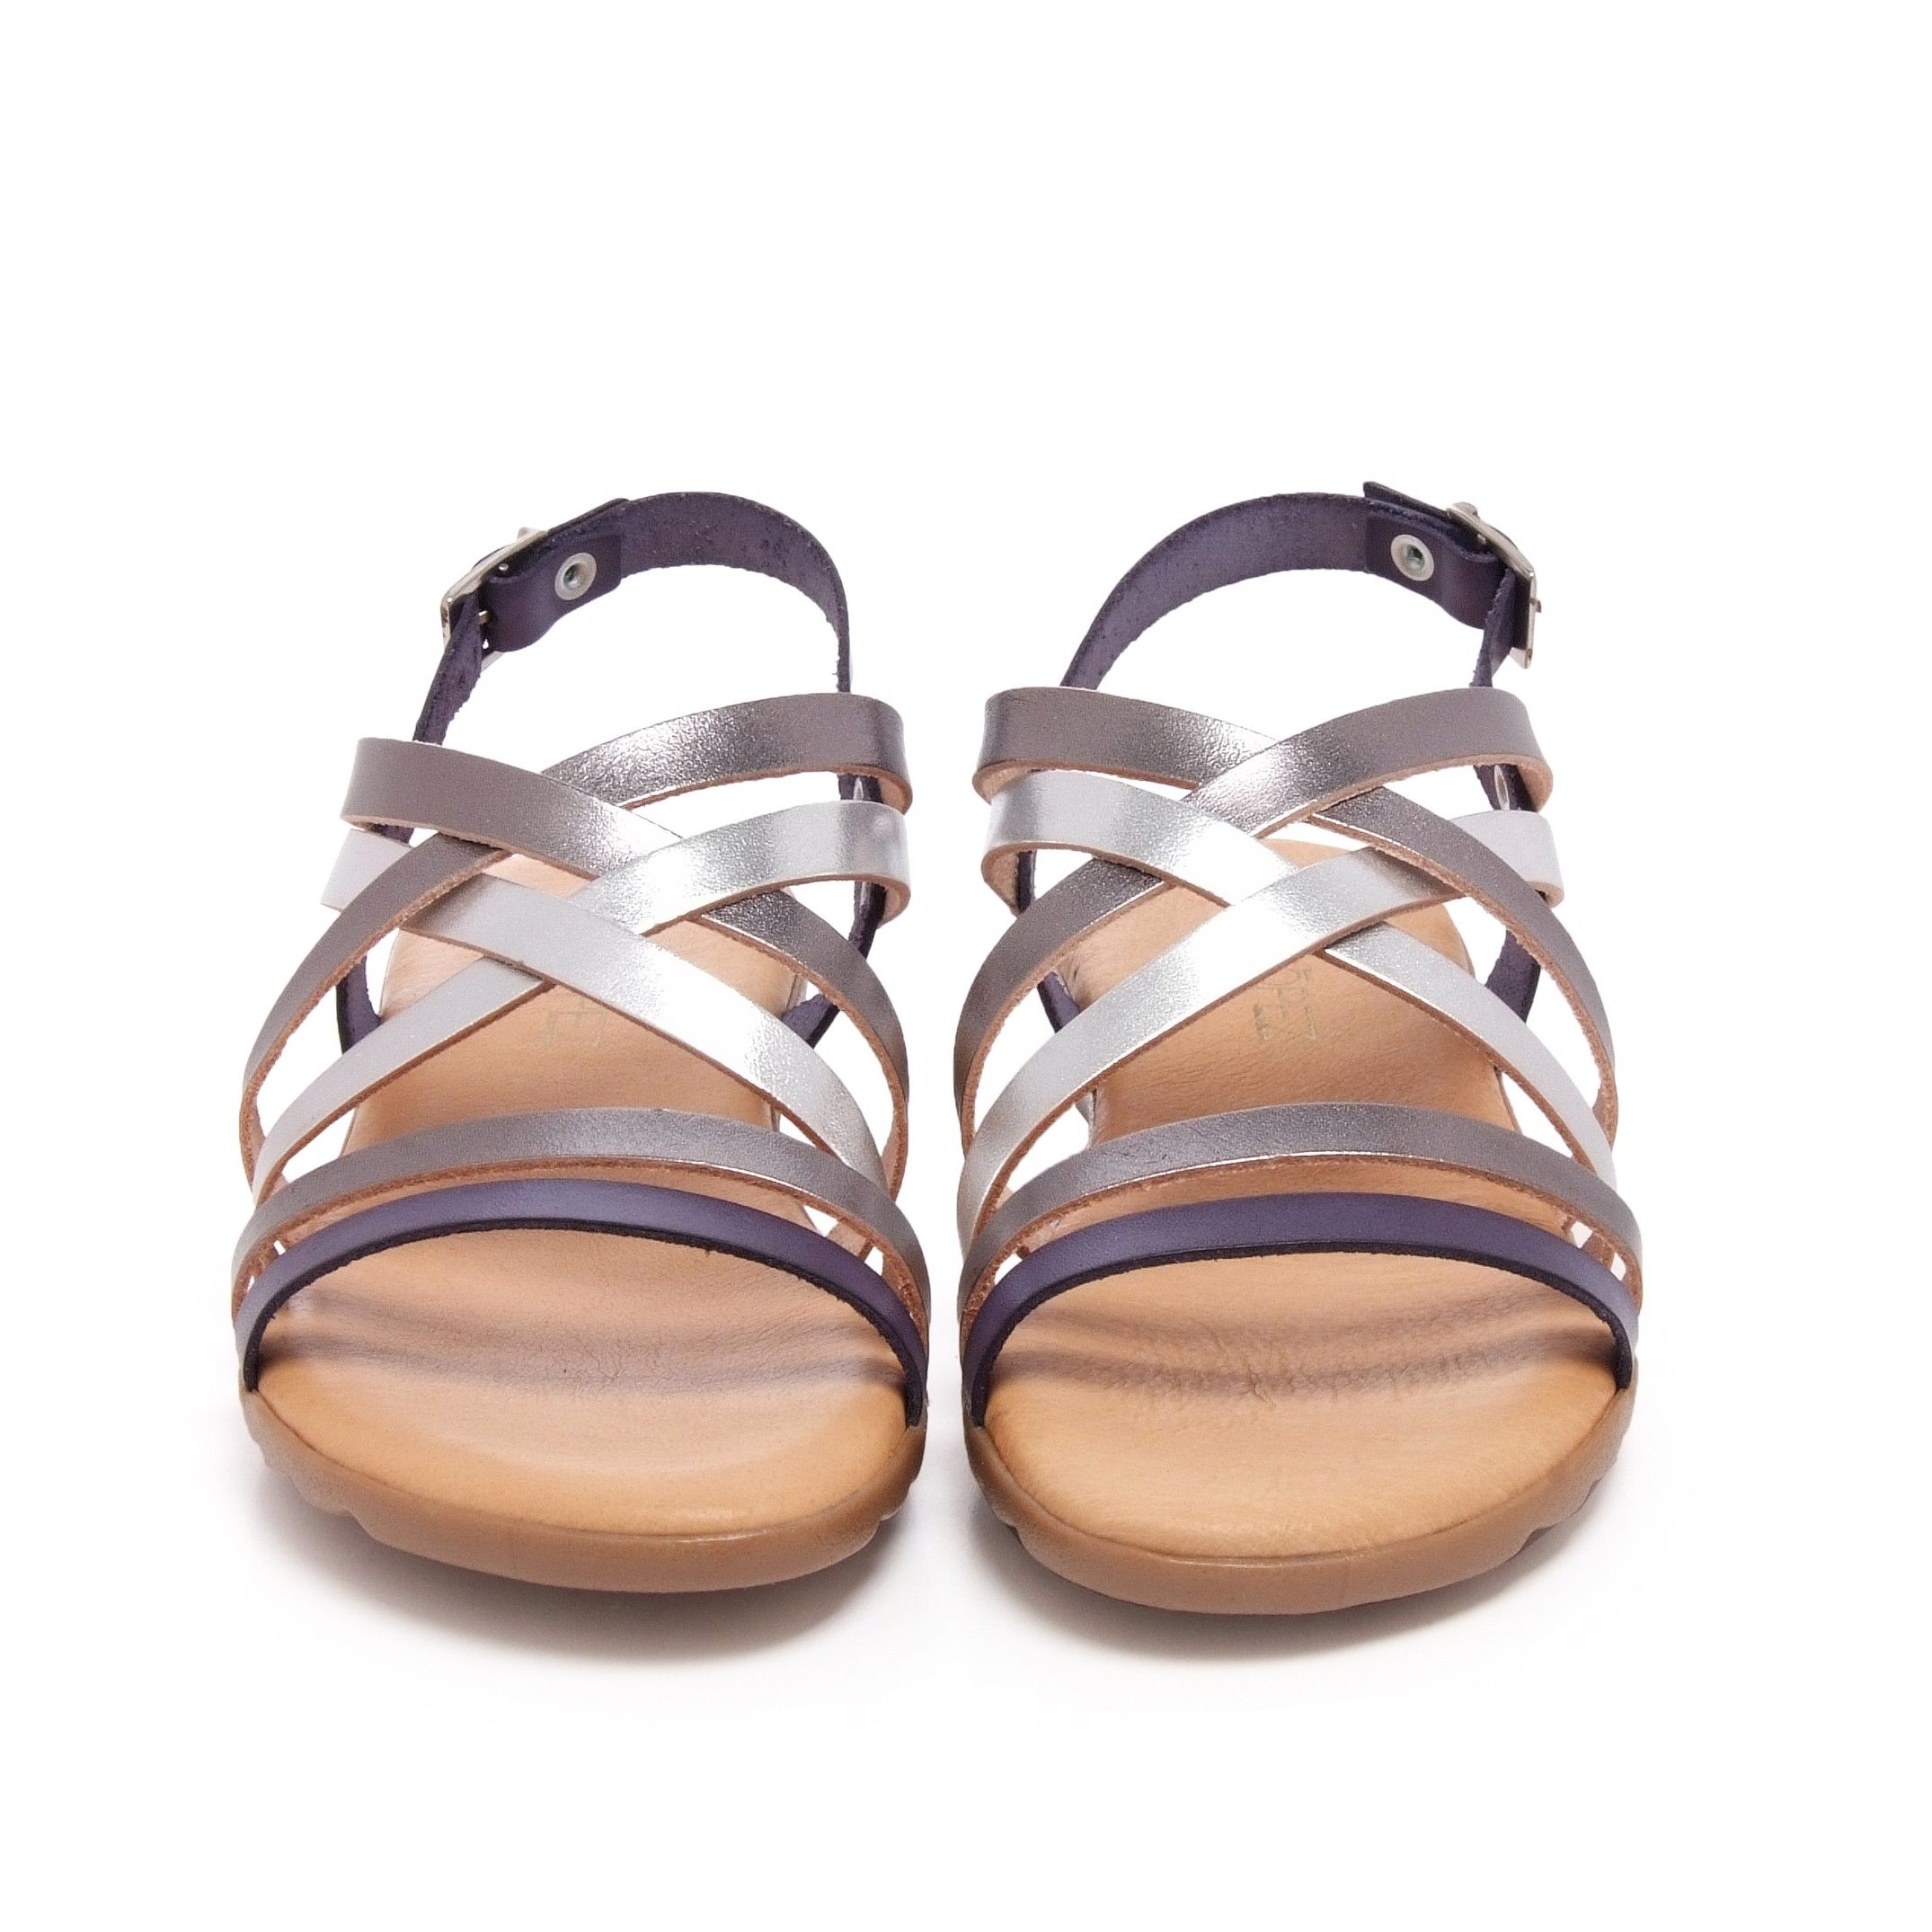 Flat leather sandal with four crossed strips and 2 strips in front. Closure: metal buckle. Upper, inner an insole : leather. Sole: Non-skid TR caramel color. MADE IN SPAIN.